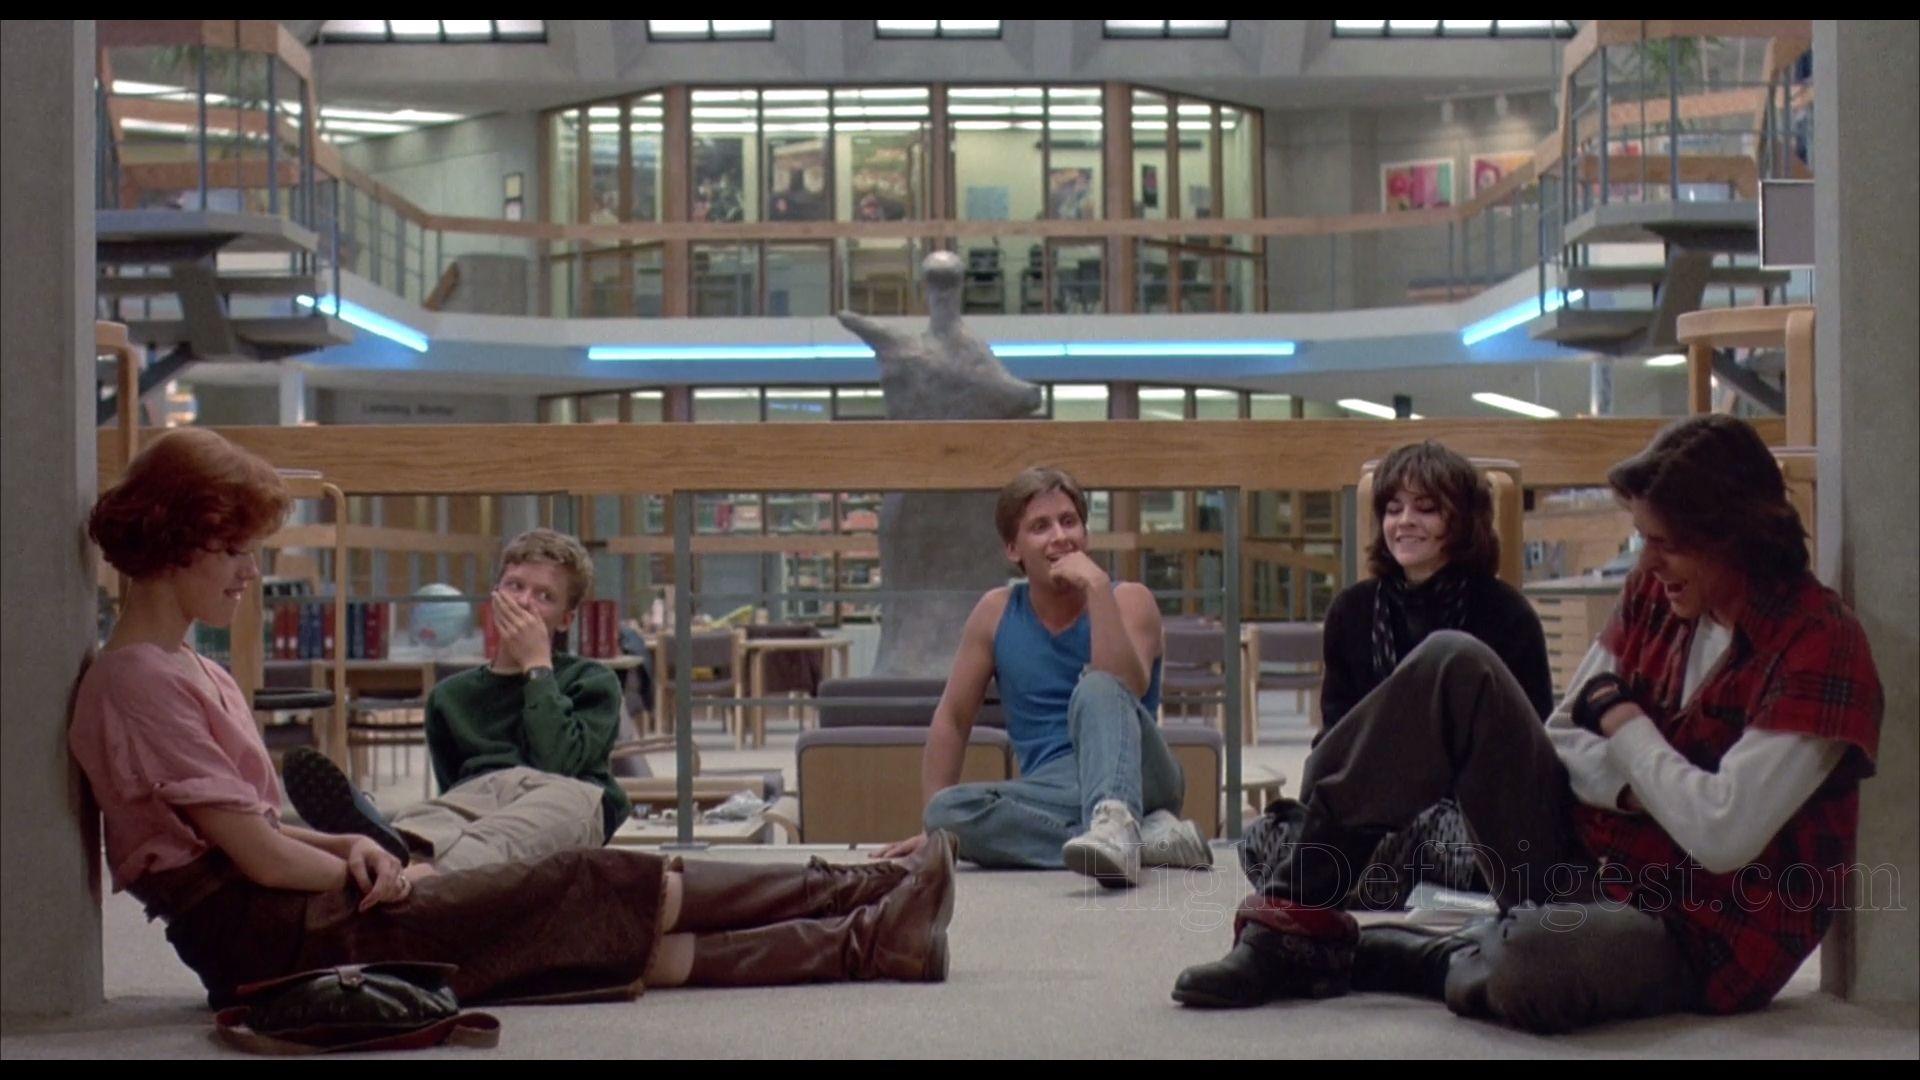 The Breakfast Club: 30th Anniversary Edition Blu Ray Review. High